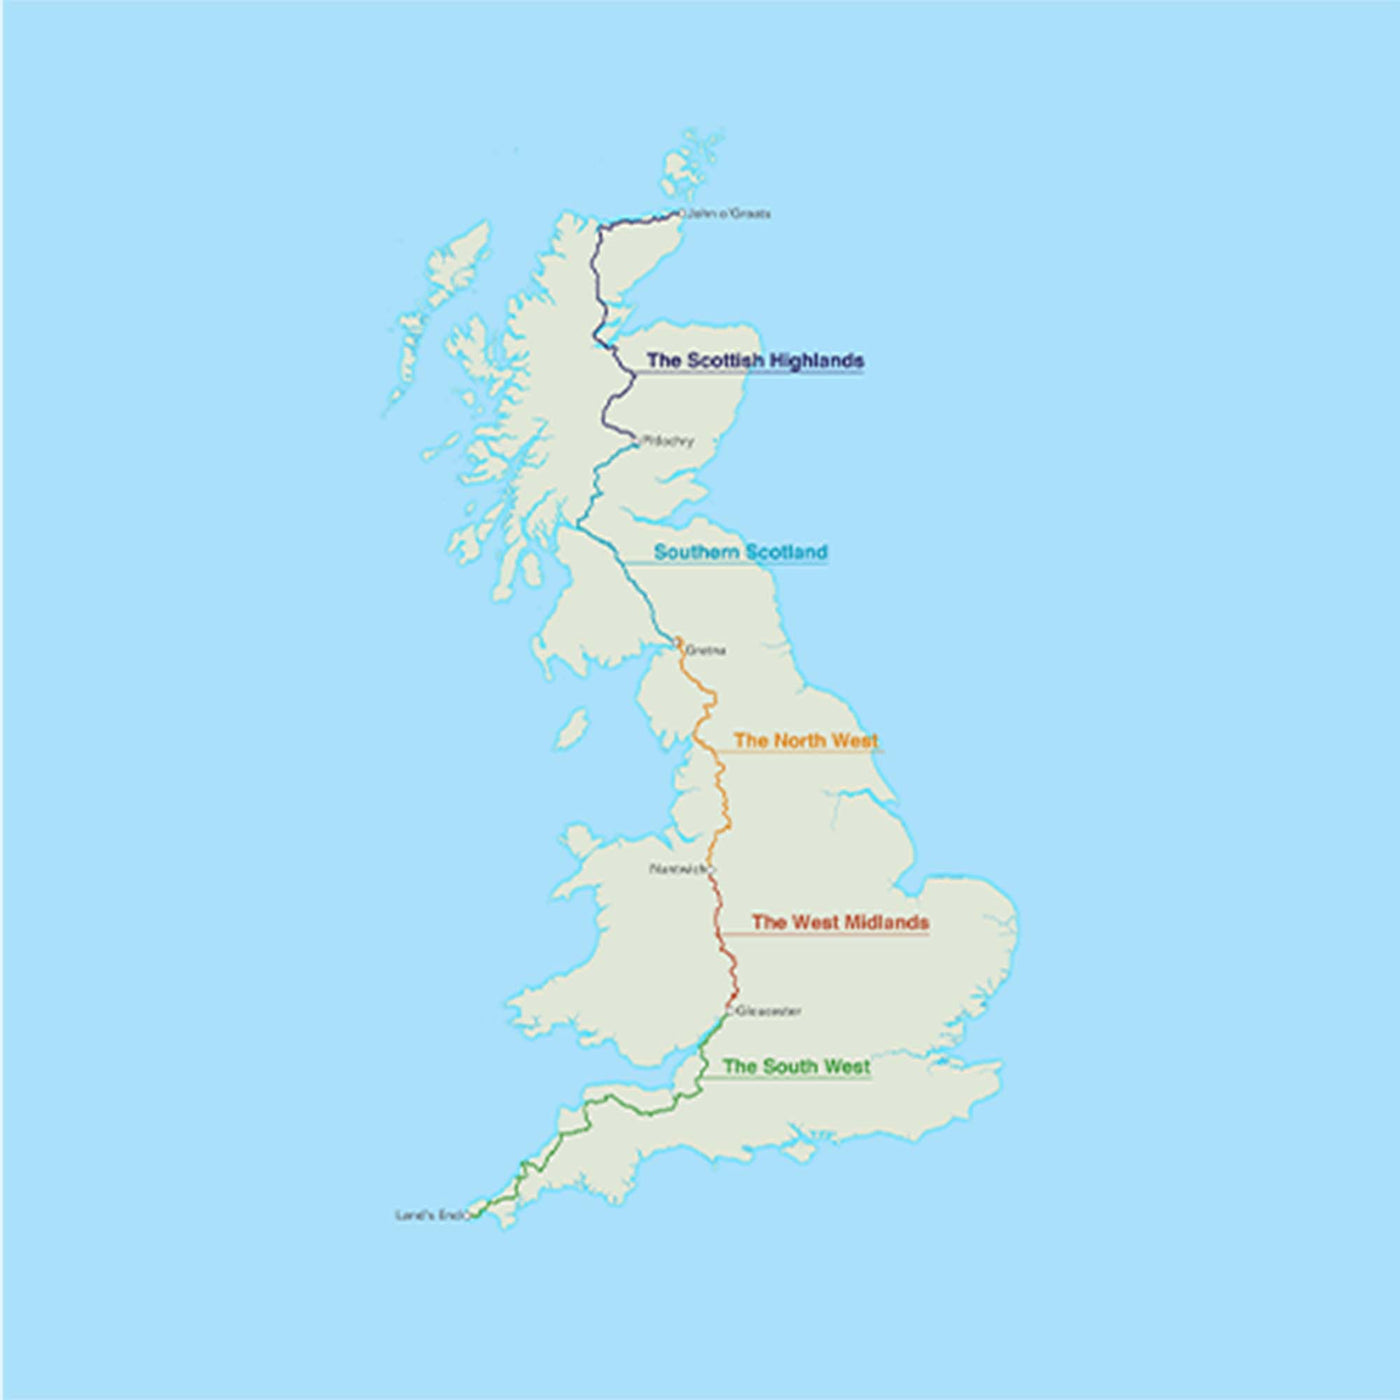 Land's End to John o'Groats (LEJOG) on the National Cycle Network Guidebook